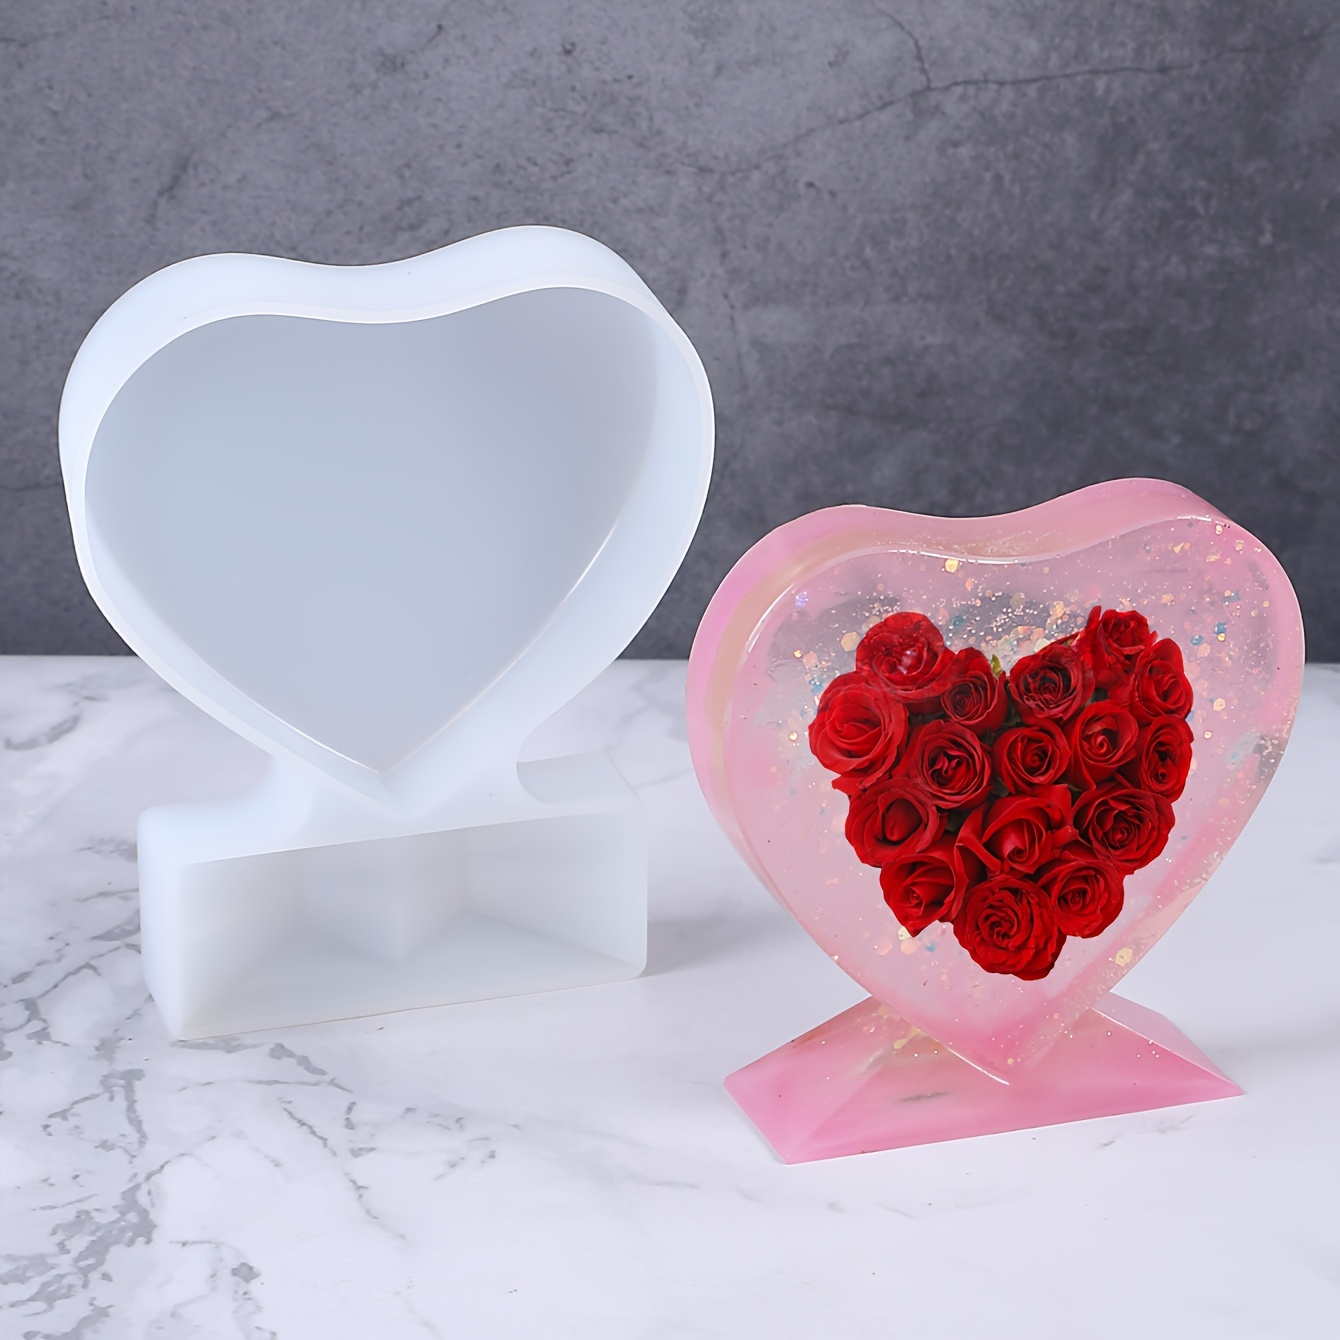 XINHUADSH Resin Craft Mold Innovative Love Picture Photo Frame Epoxy Resin  Mold Widely Applied Great for Family 